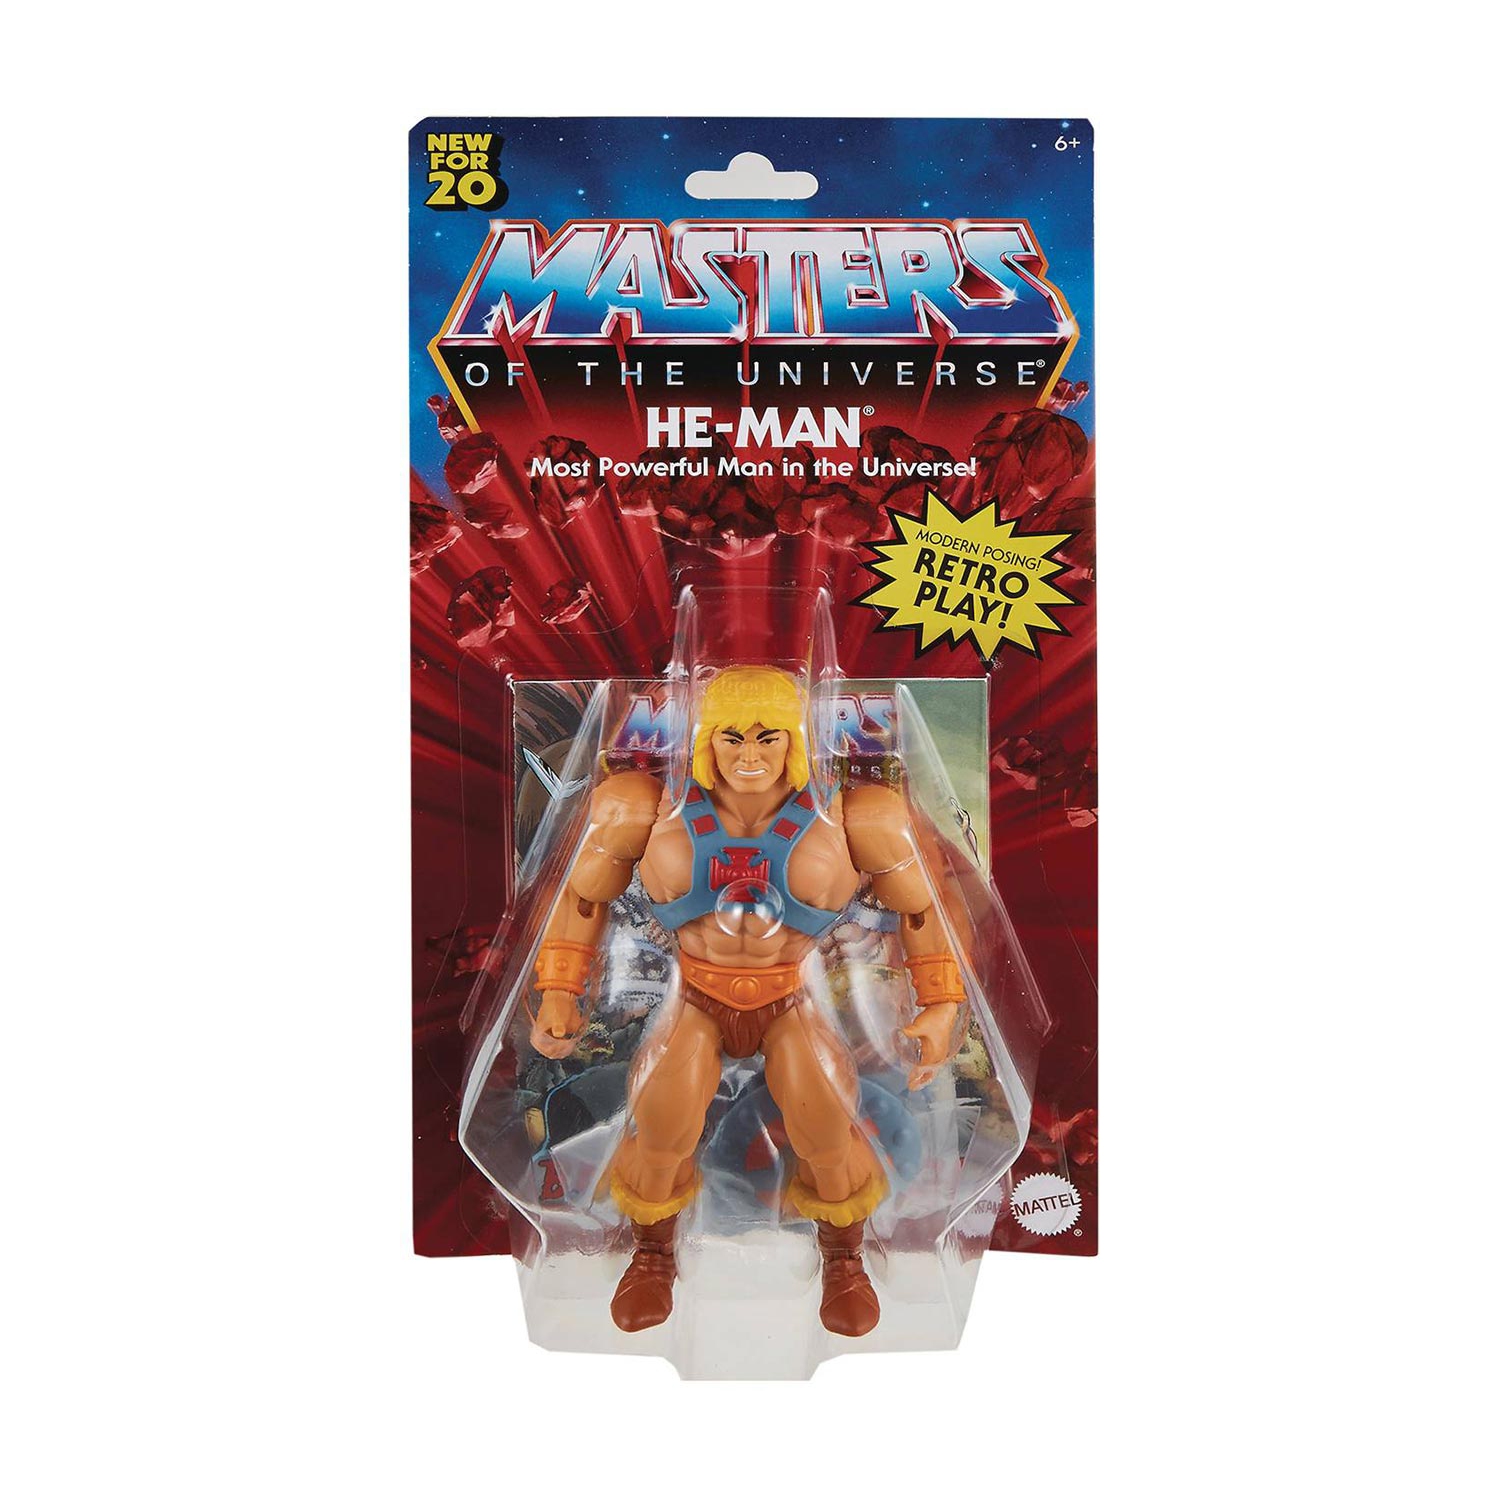 Masters Of The Universe Origins 6 Inch Action Figure Retro Play - He-Man (Long Hair)